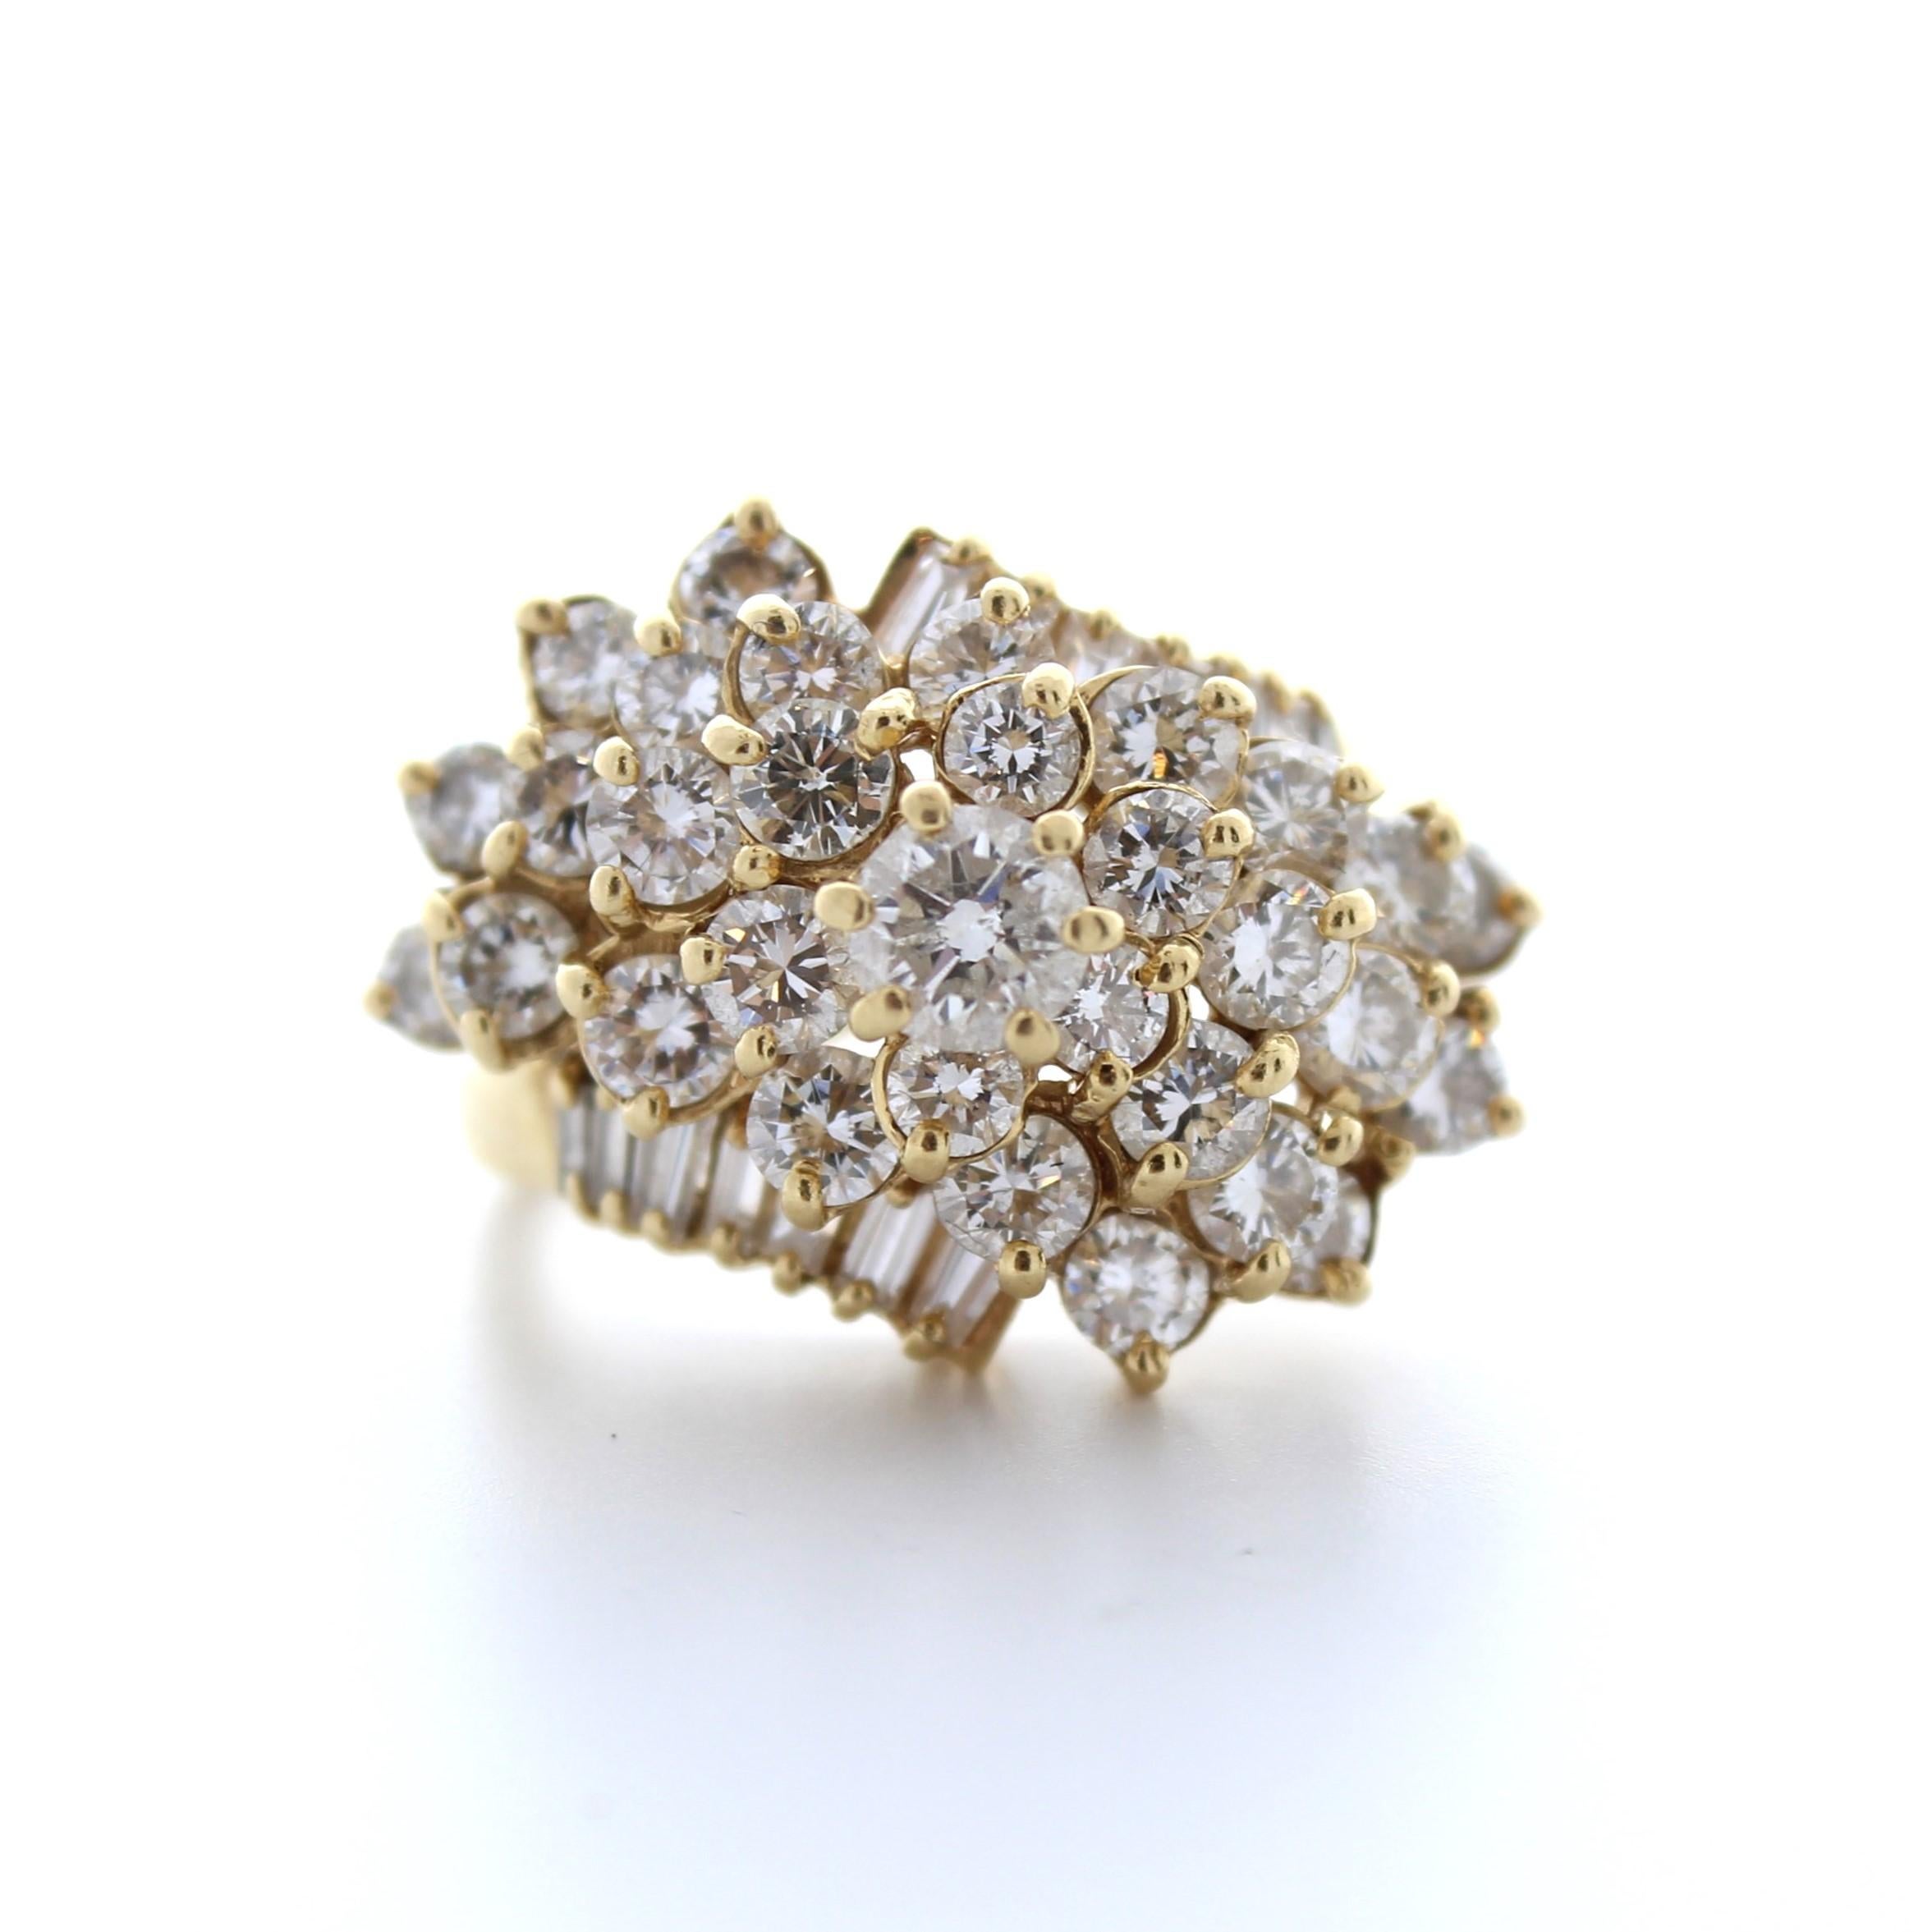 The 3.00 Carat Total Mixed Cut Diamond Ring in 14K Yellow Gold is a beautiful piece of jewelry that features a collection of mixed-cut diamonds set in a classic and elegant design. The ring is crafted from high-quality 14K yellow gold, which